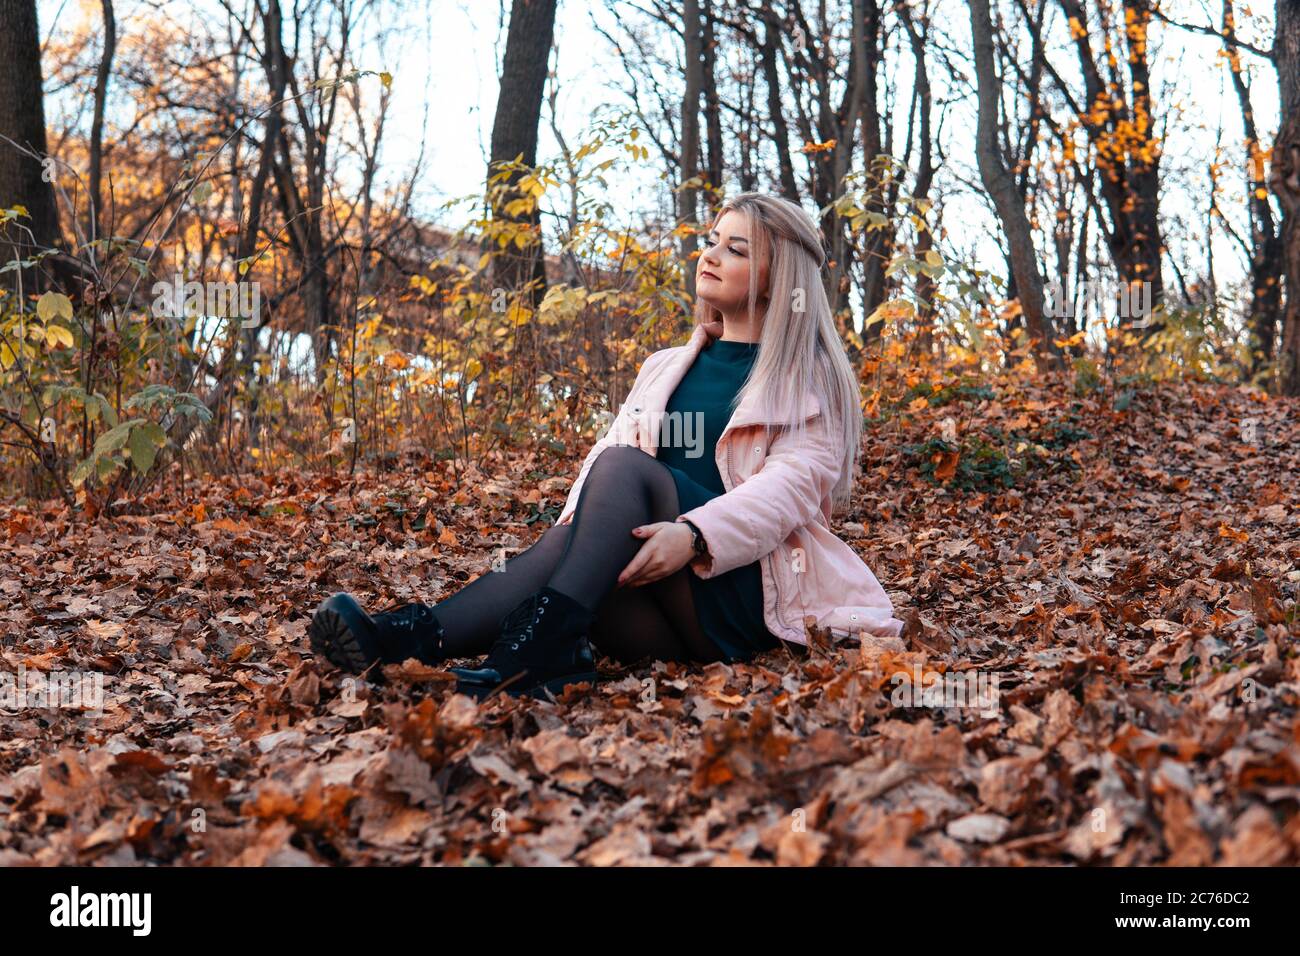 A young pleasant woman in casual clothes with long hair is sitting in the autumn forest. Stock Photo